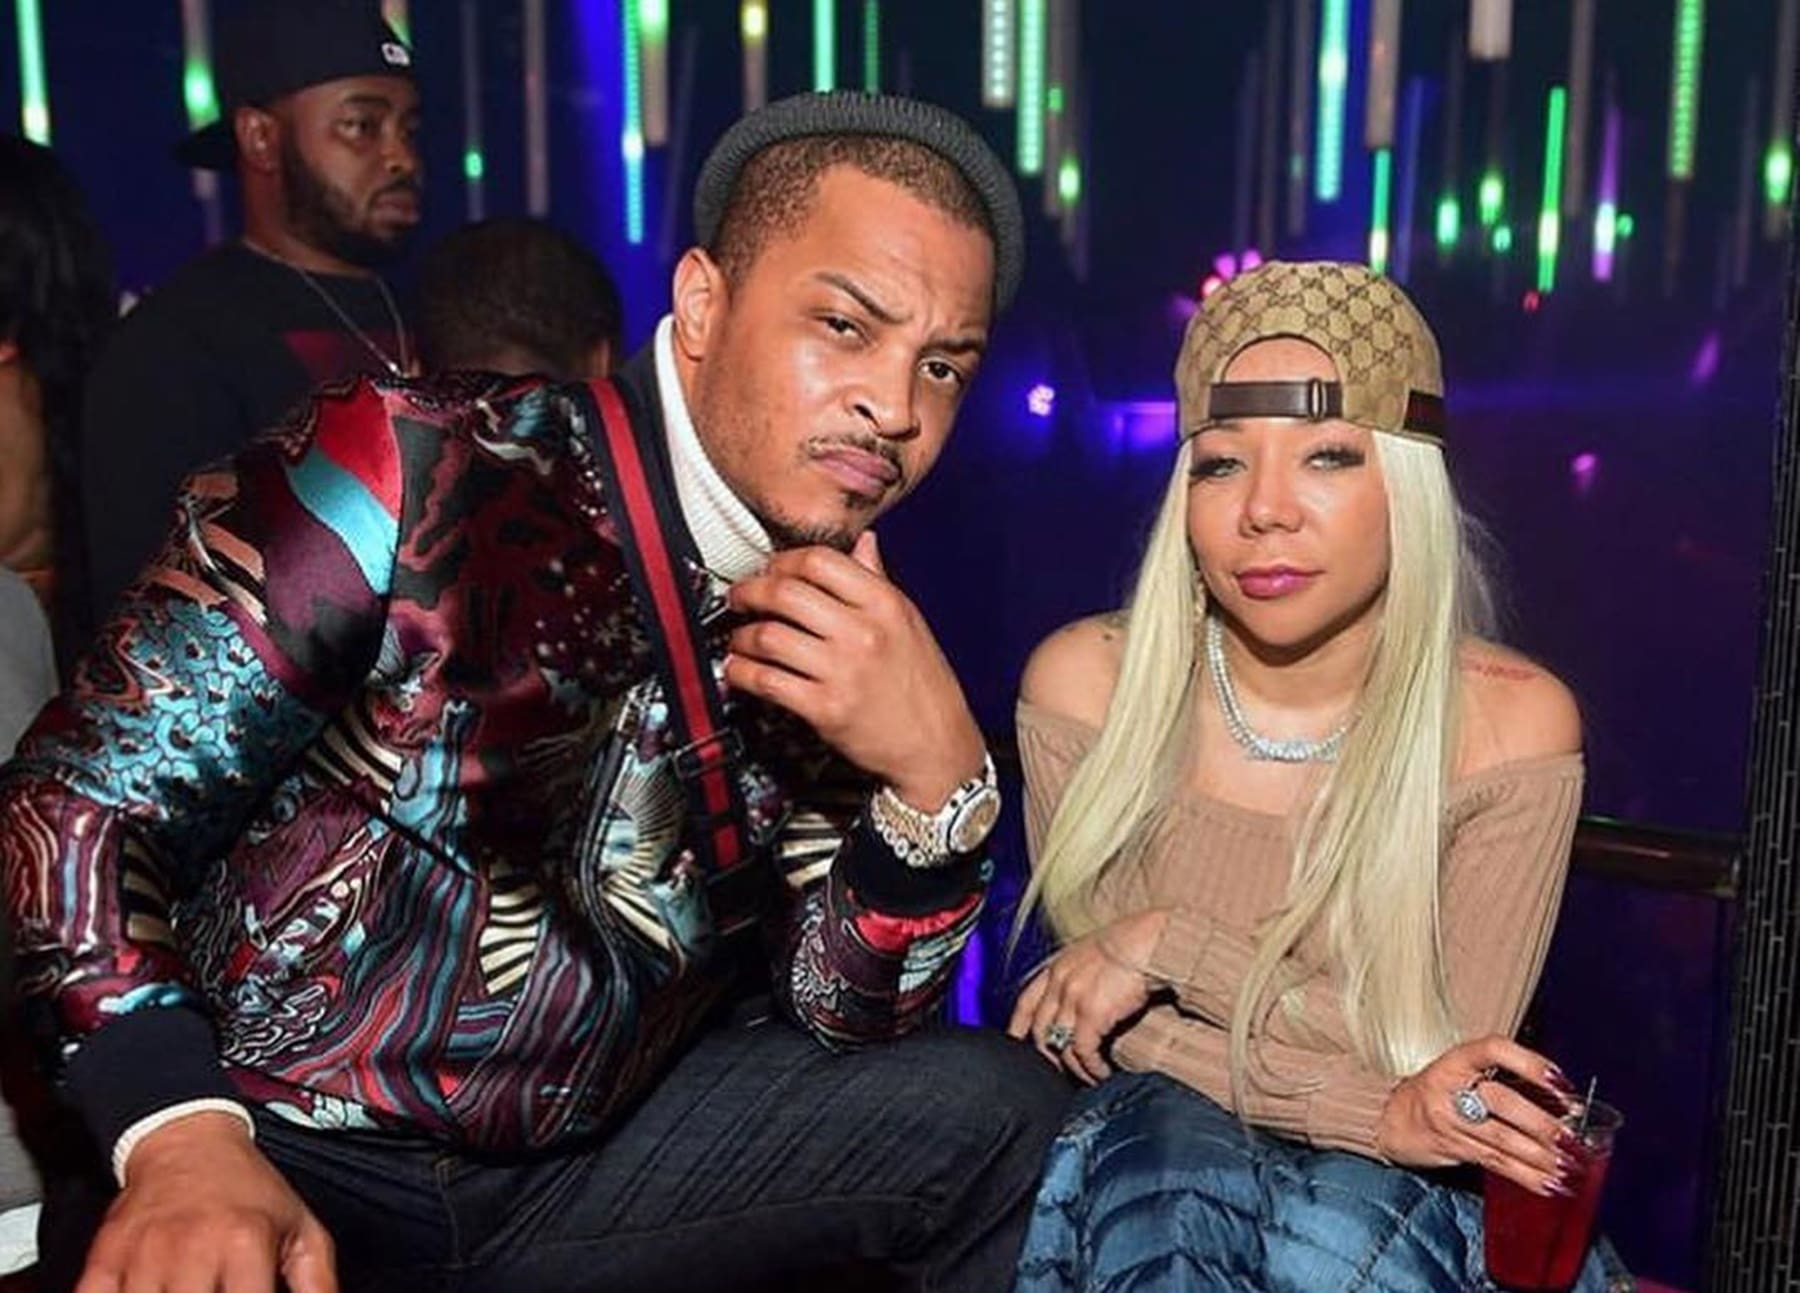 T.I. Slams Haters Who Disrespect His Wife, Tiny Harris - He Publicly Proclaims His Love For Her